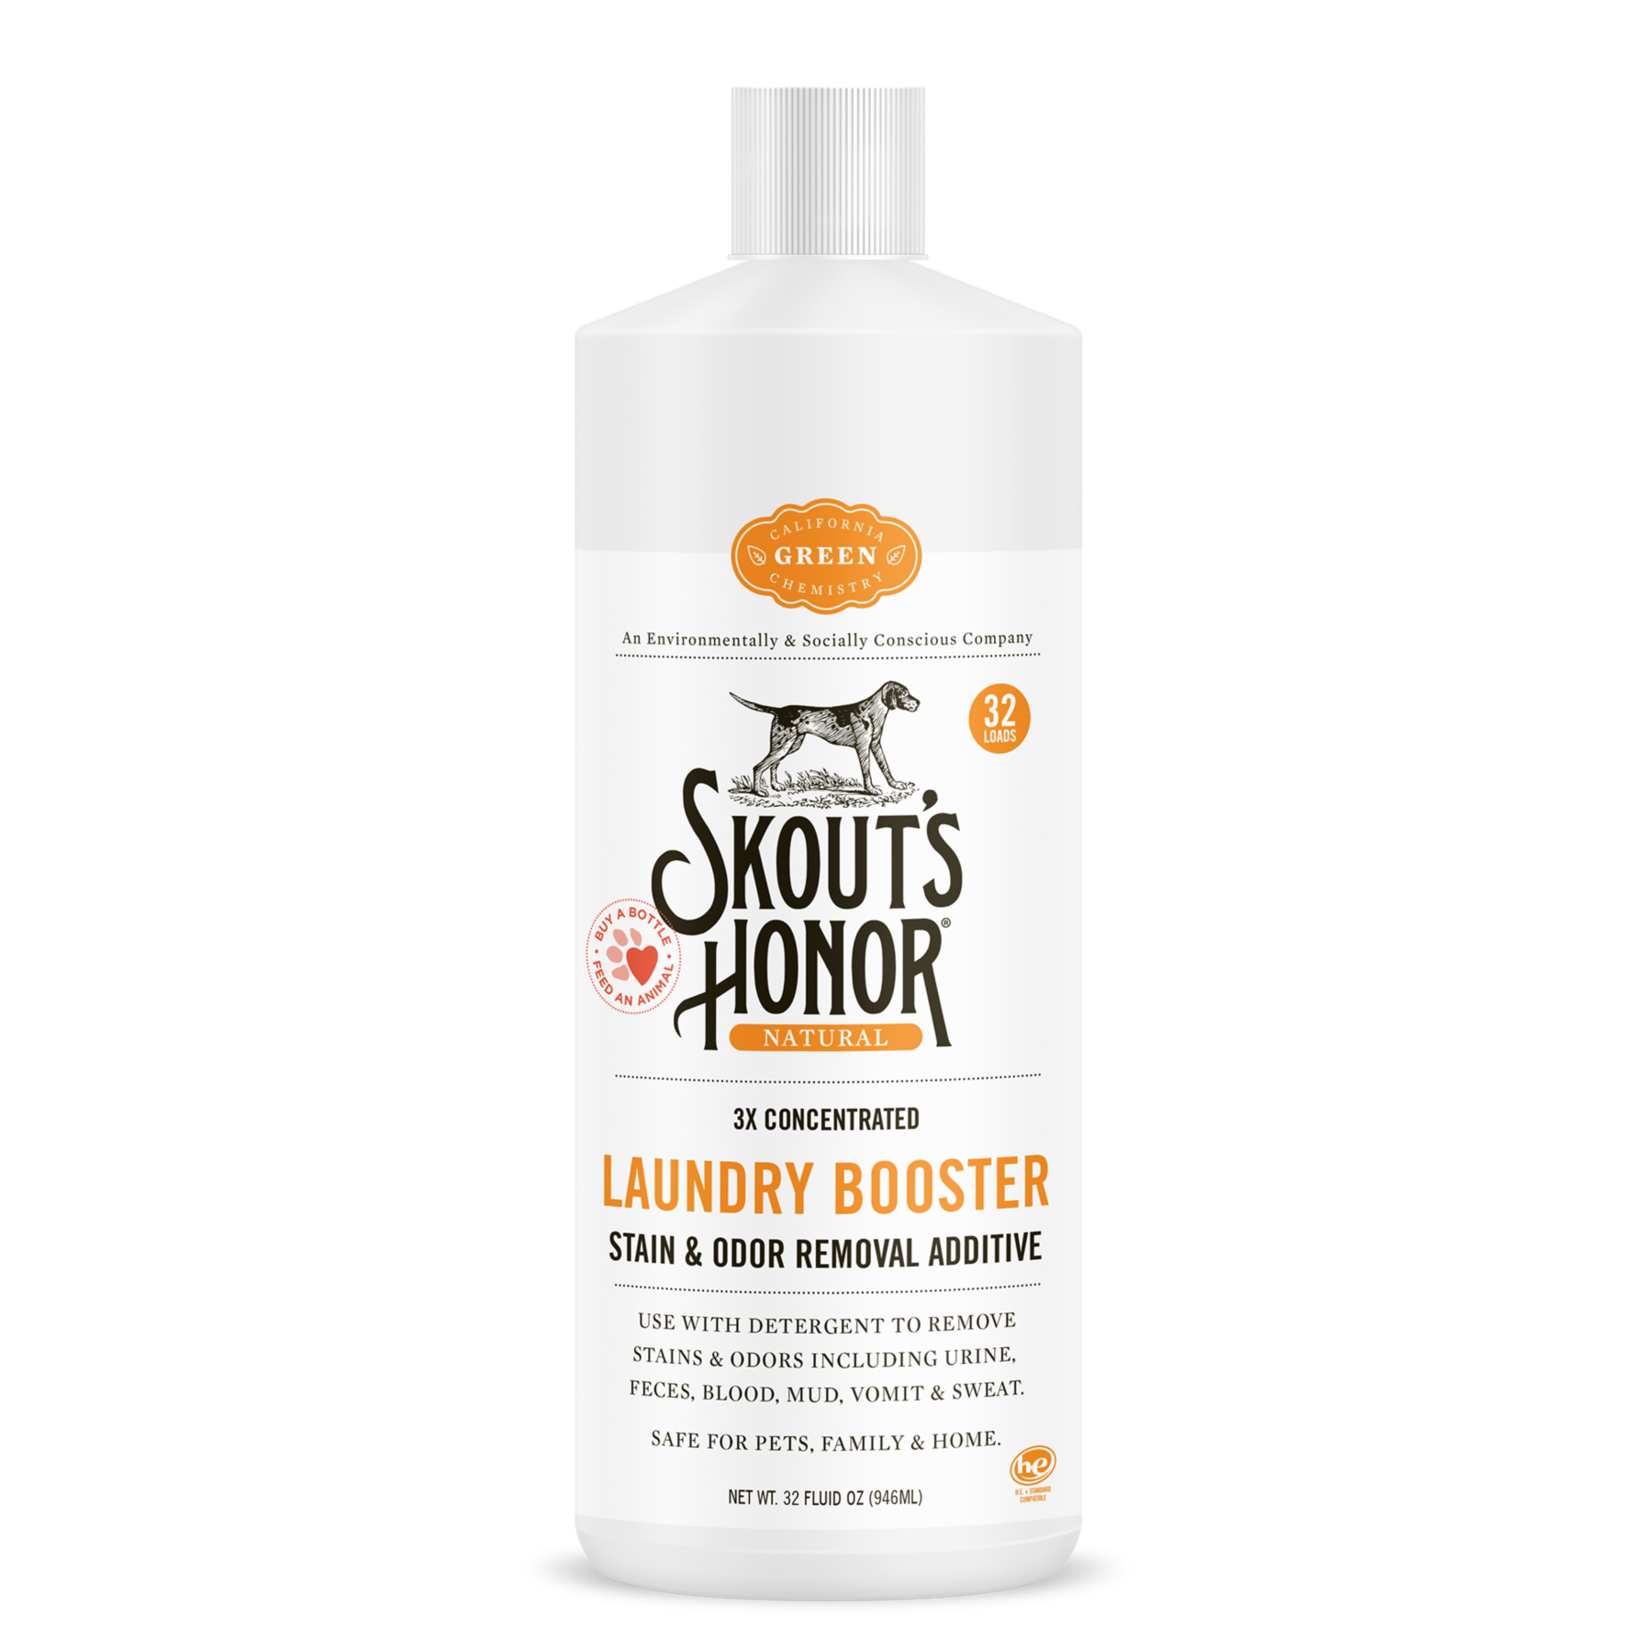 Skouts Honor Skout's Honor 3X Concentrated Laundry Booster 32oz Stain and Odor Removal Additive